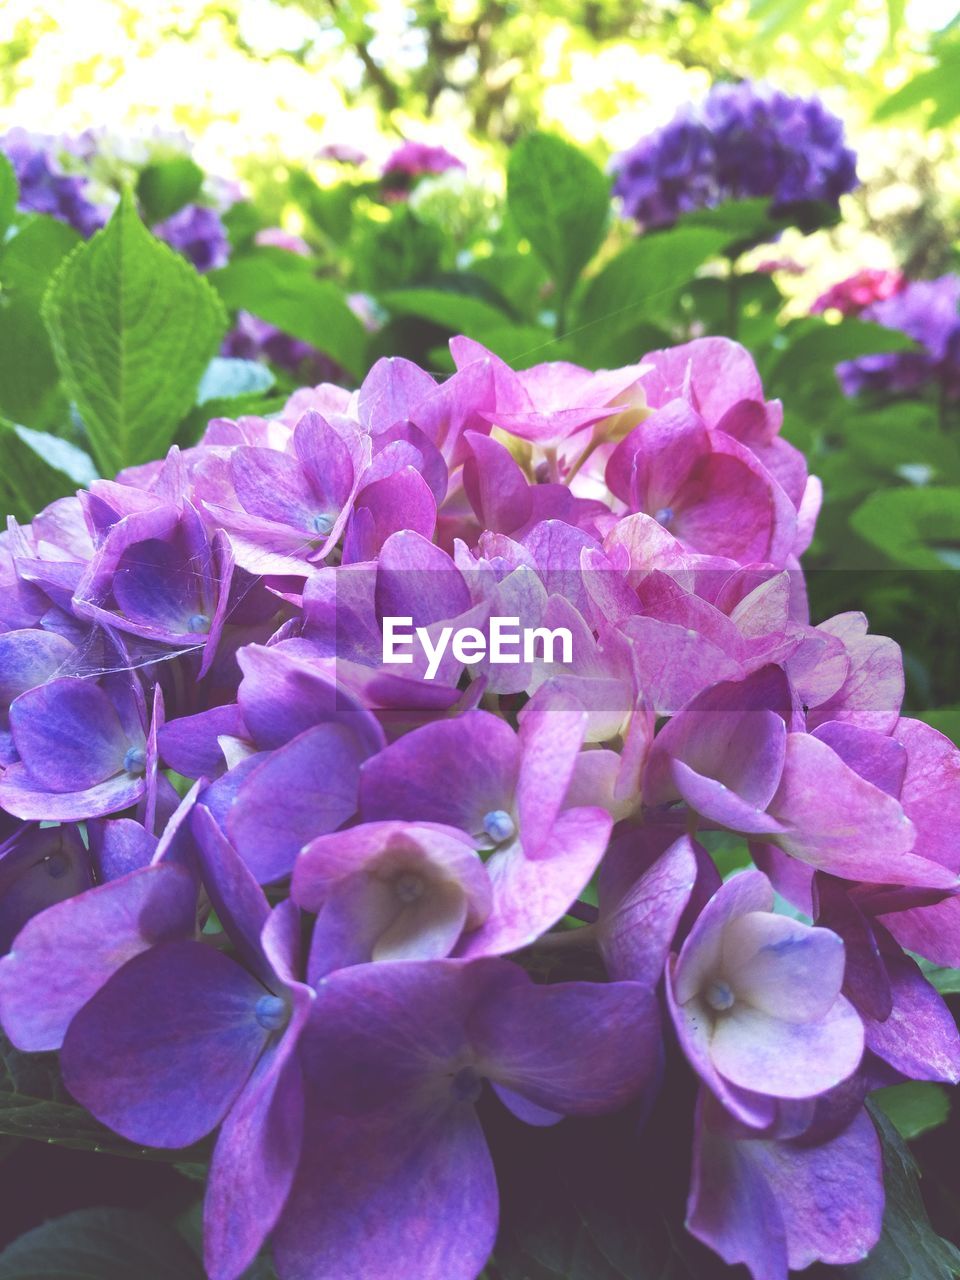 CLOSE-UP OF PURPLE HYDRANGEA FLOWERS BLOOMING OUTDOORS